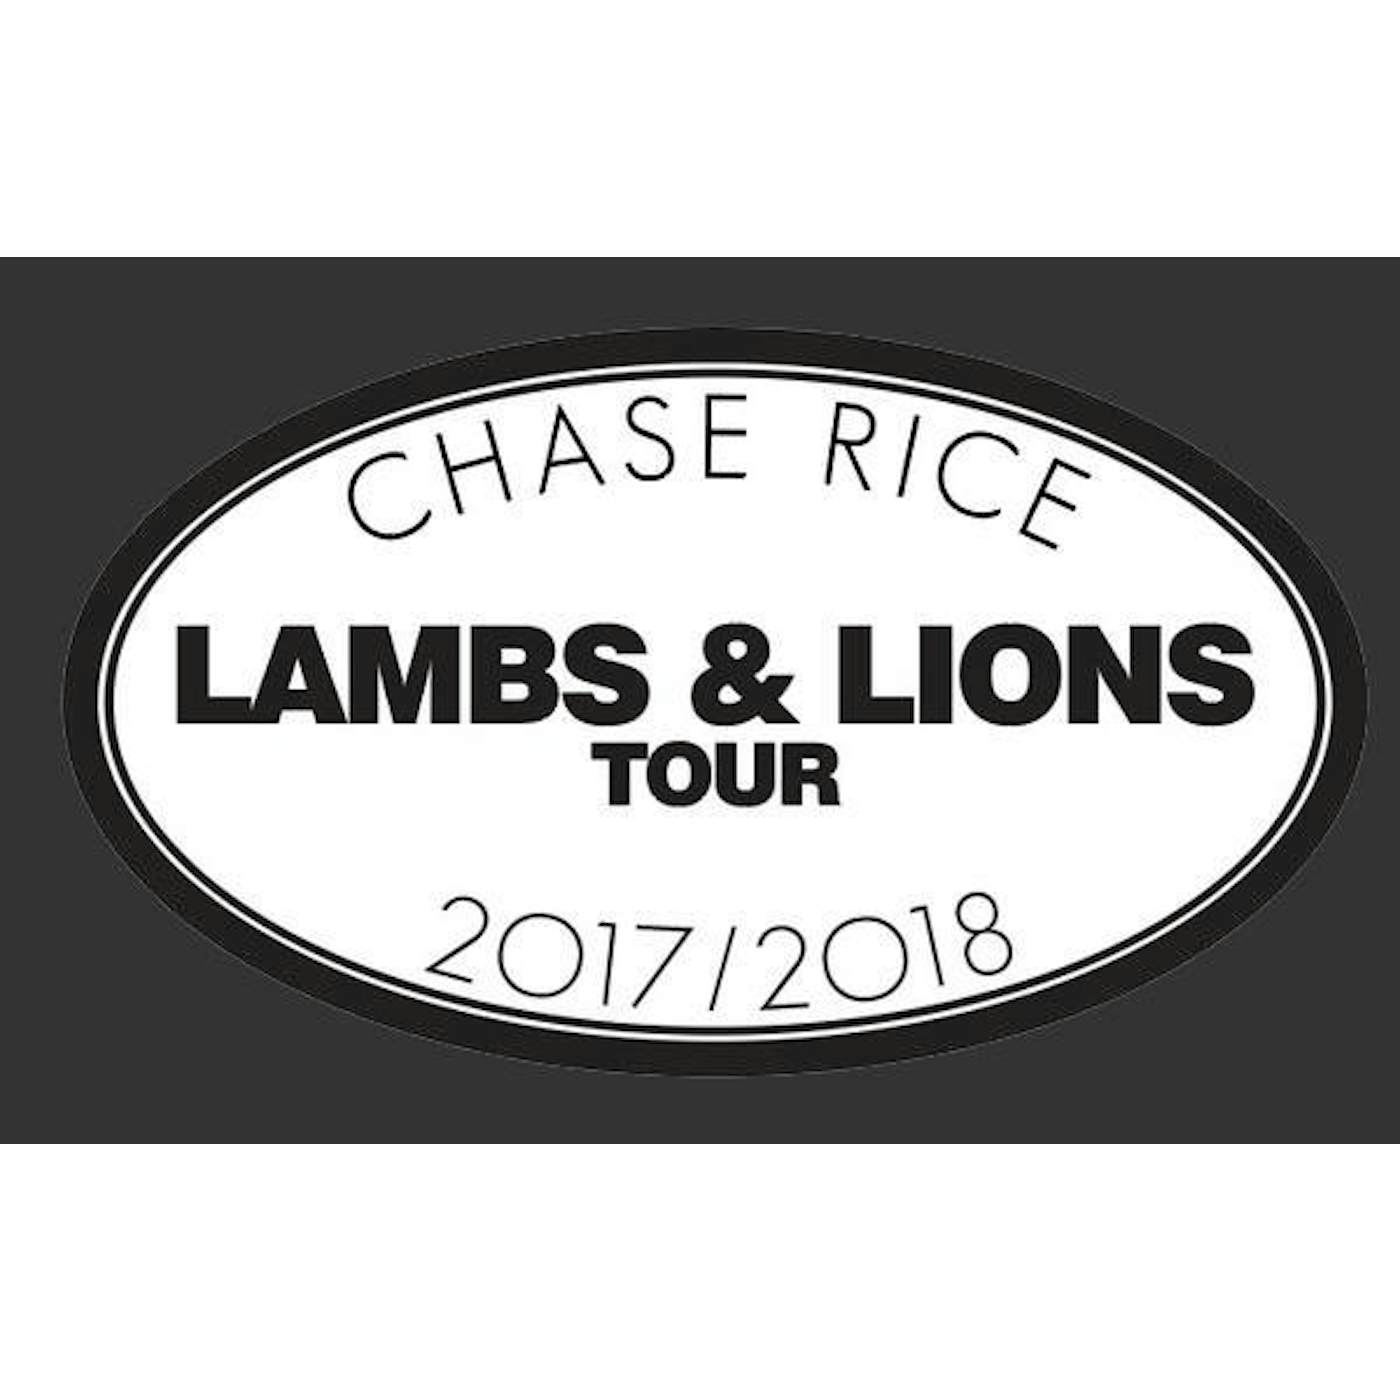 Chase Rice Lambs & Lions Tour Sticker